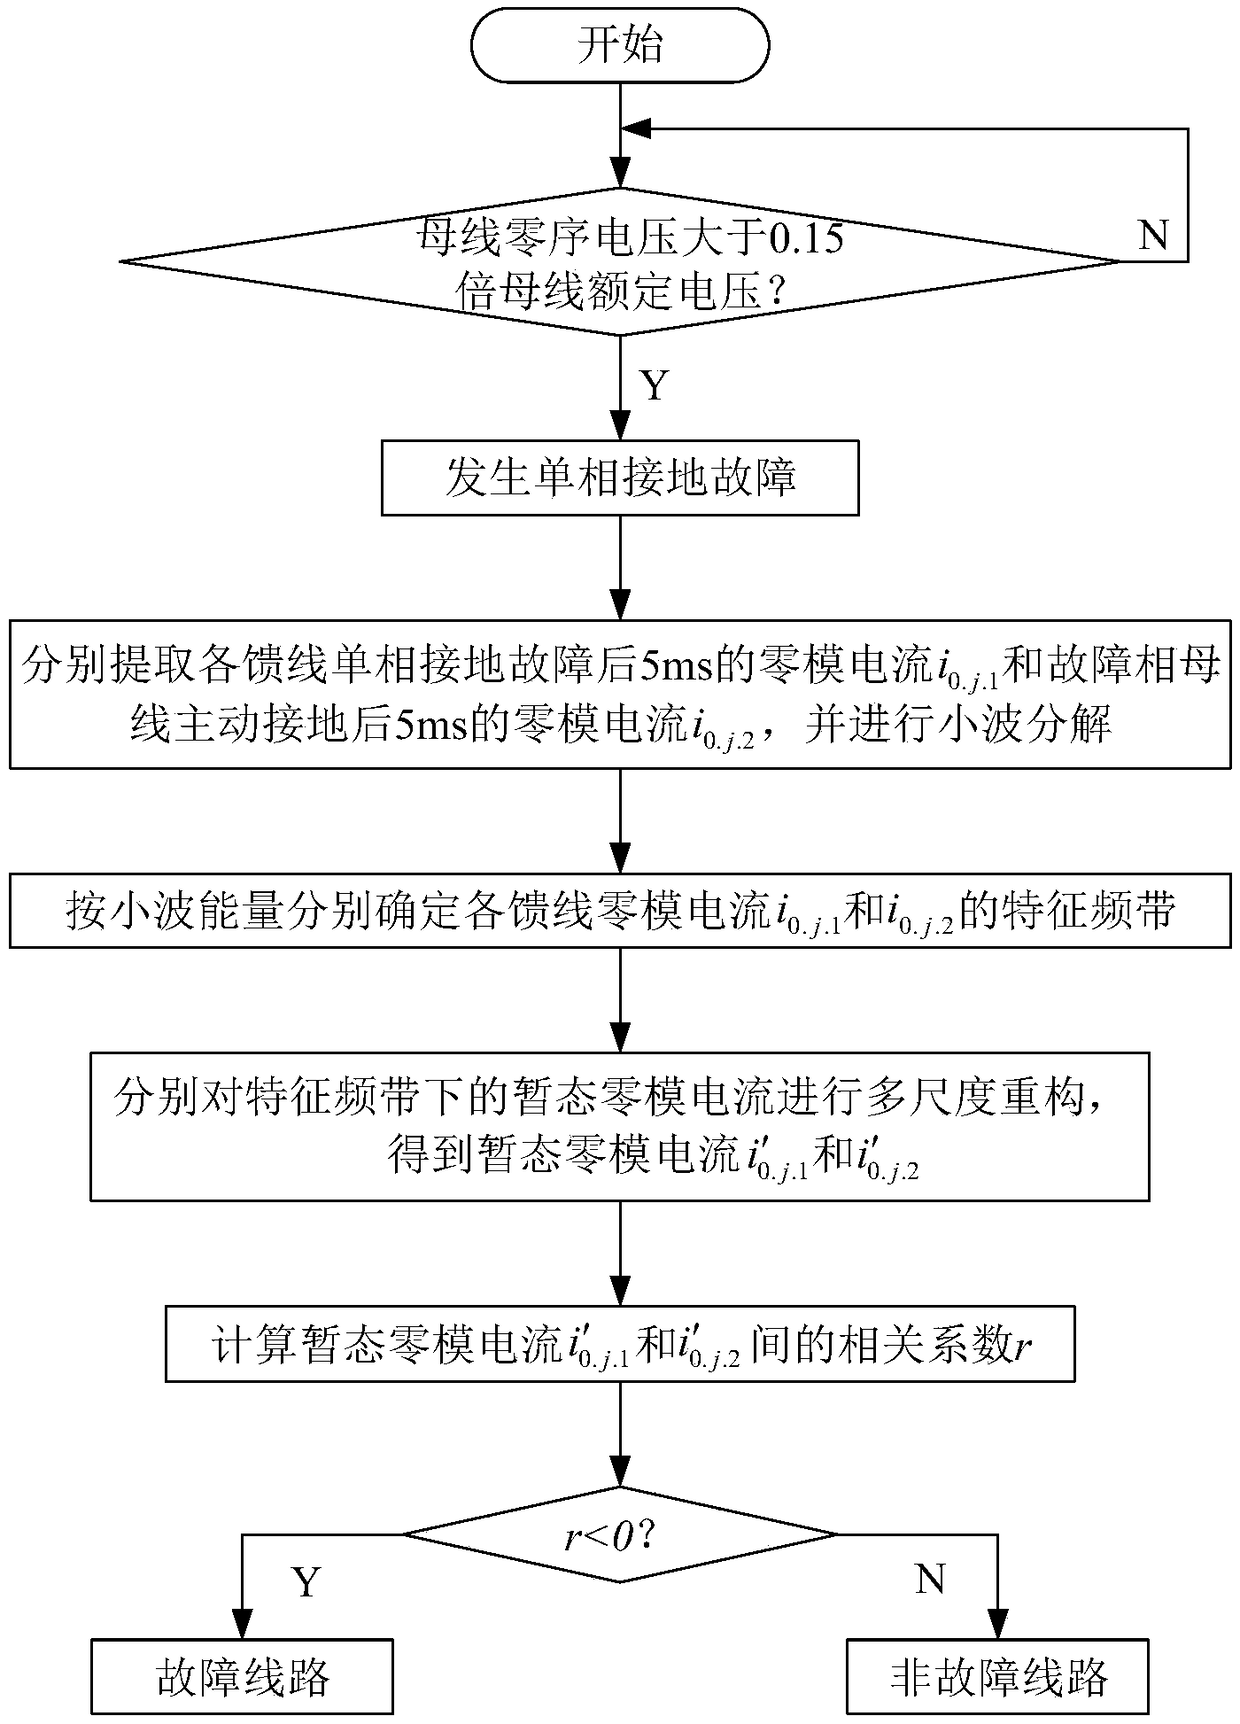 Distribution network transient state fault line selection method for grounding fault transfer control